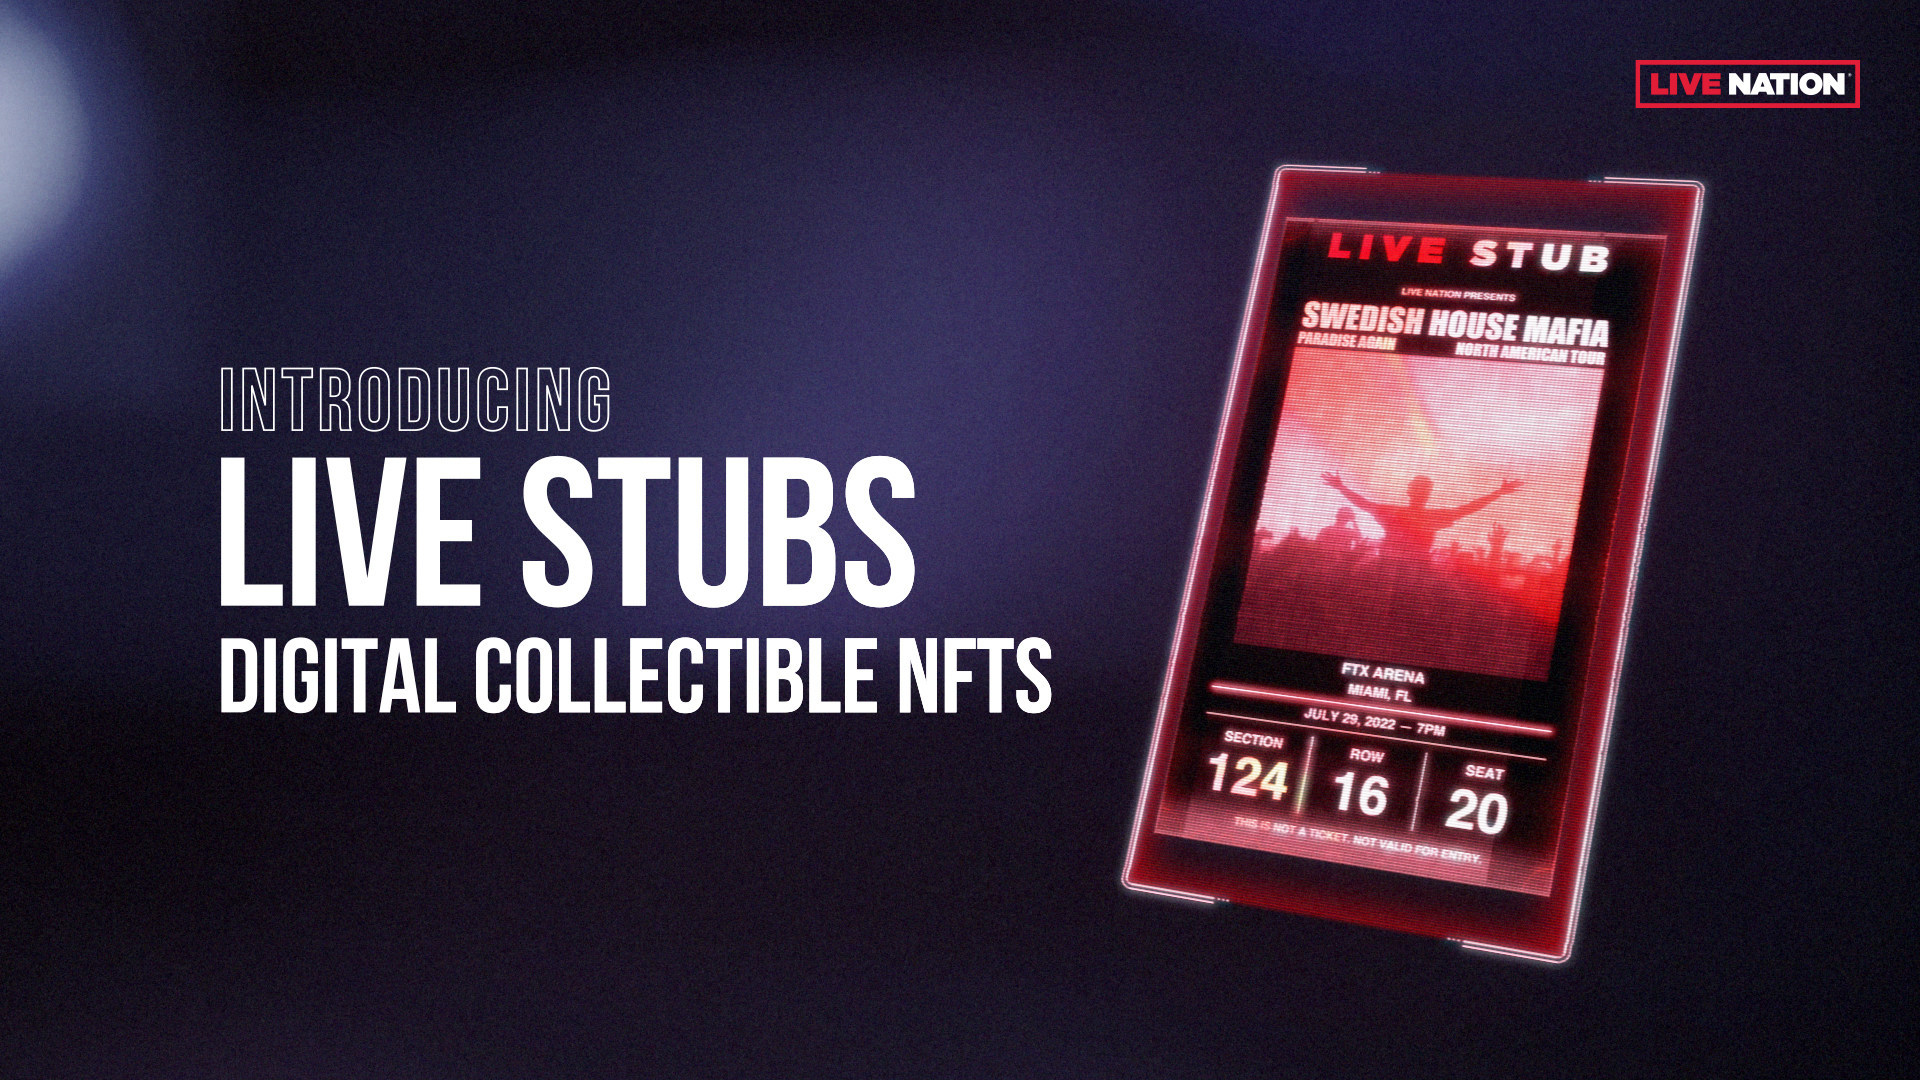 Live Nation Unveils Live Stubs™ Digital Collectible NFT Ticket Stubs,  Minting First Ever Set For The SWEDISH HOUSE MAFIA: PARADISE AGAIN TOUR - Live  Nation Entertainment